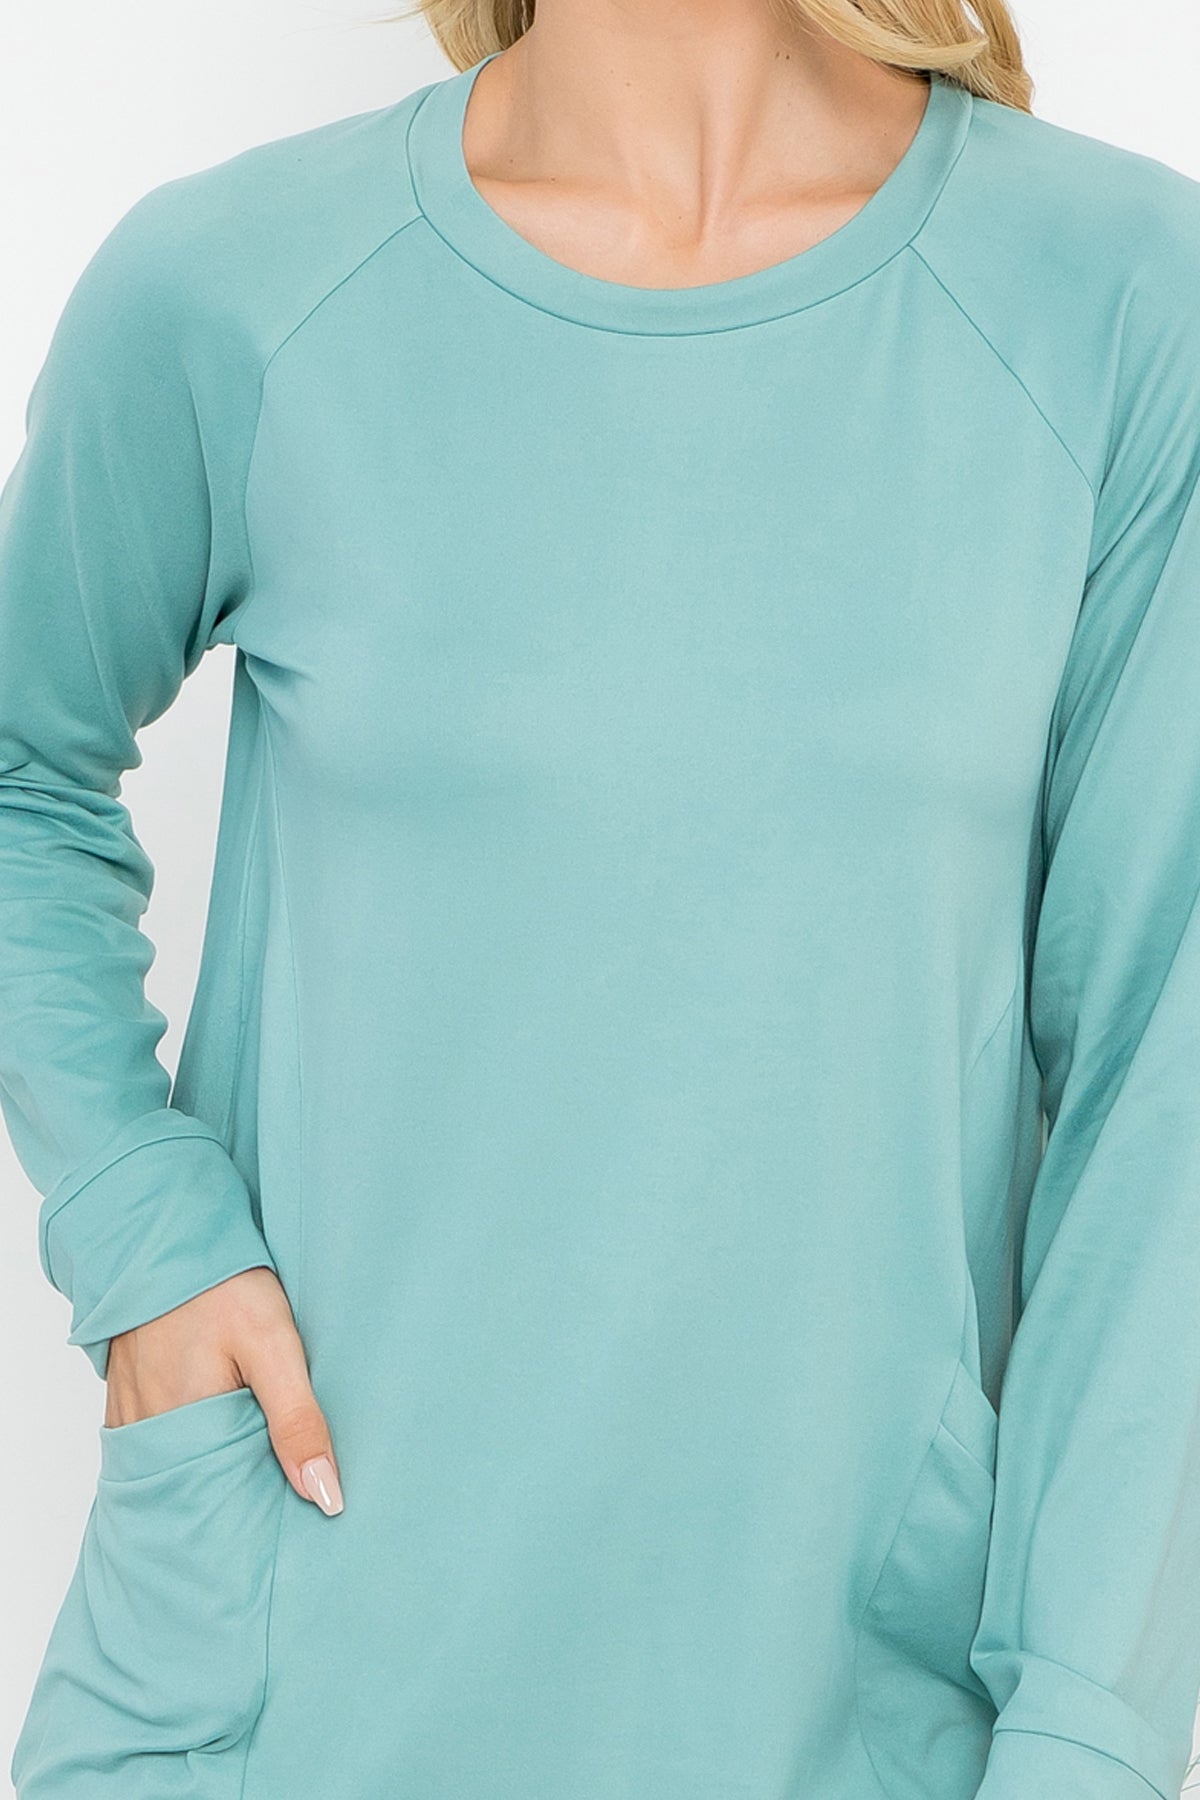 PLUS SIZE SOLID LONG SLEEVE FRONT POCKET TOP 3-2-1